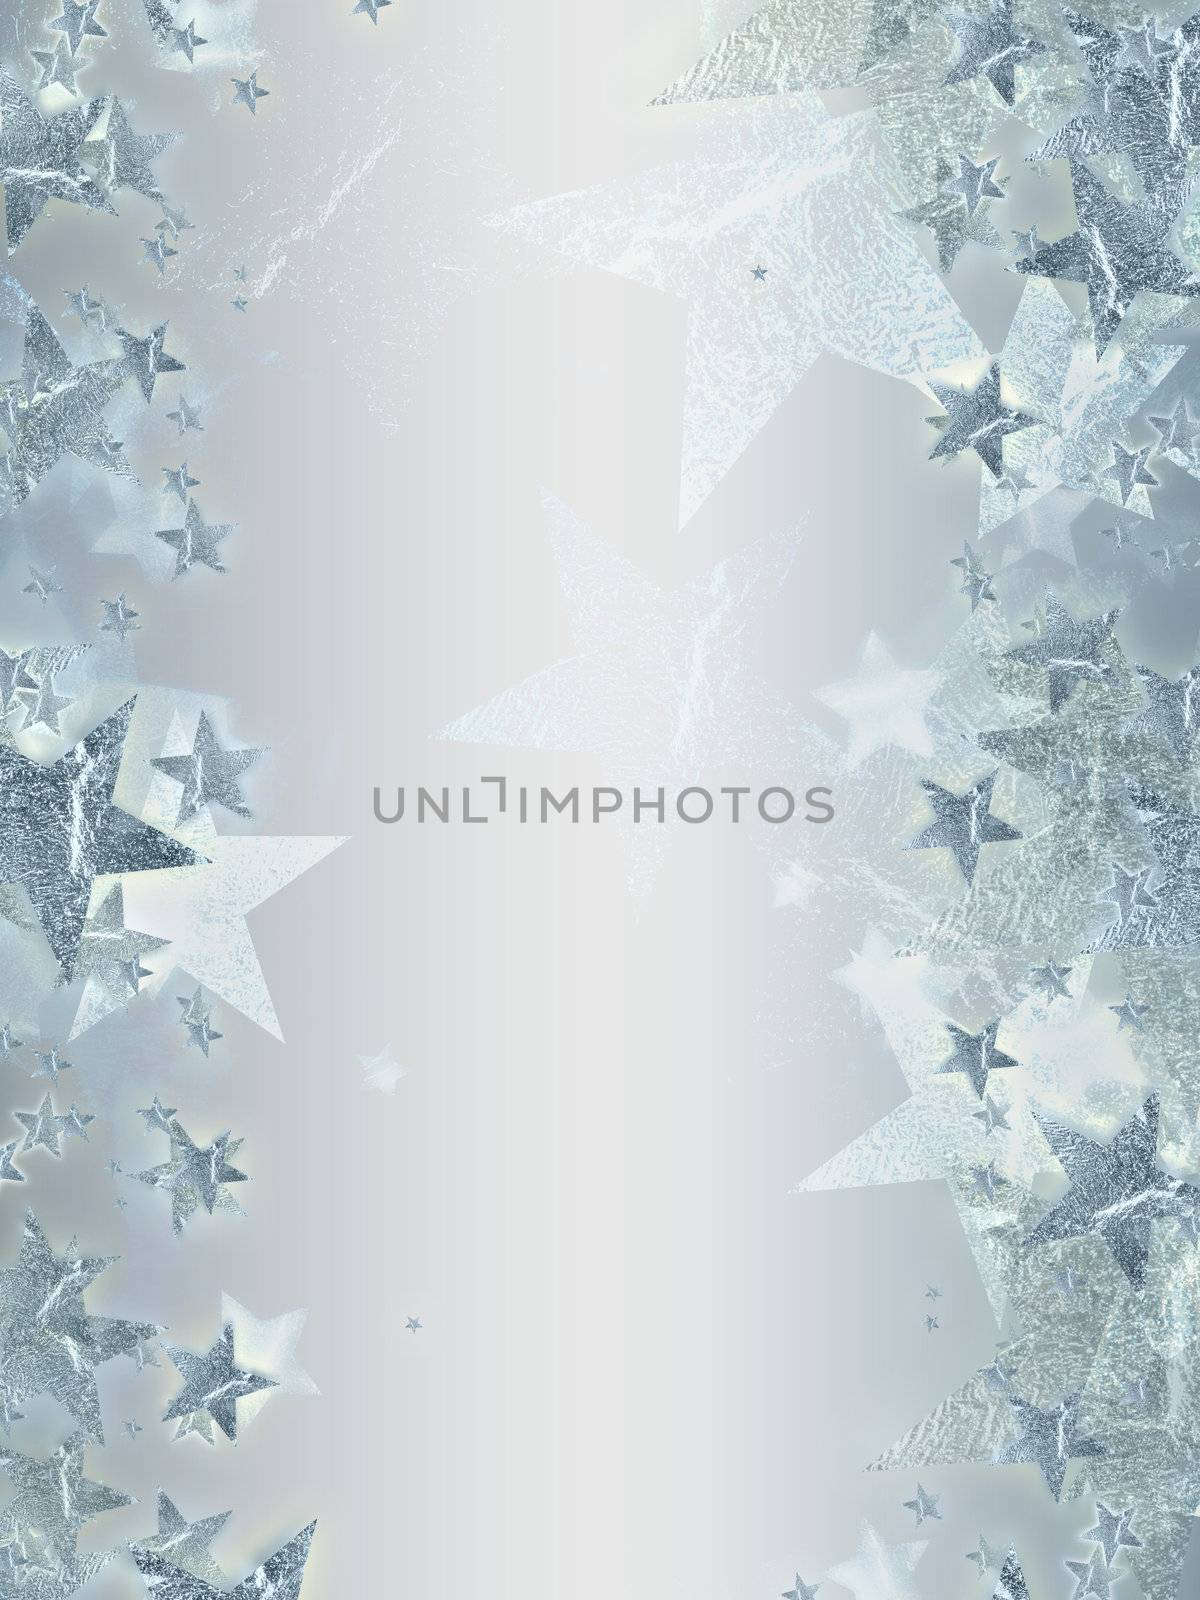 shining silver stars over grey background, abstract christmas card